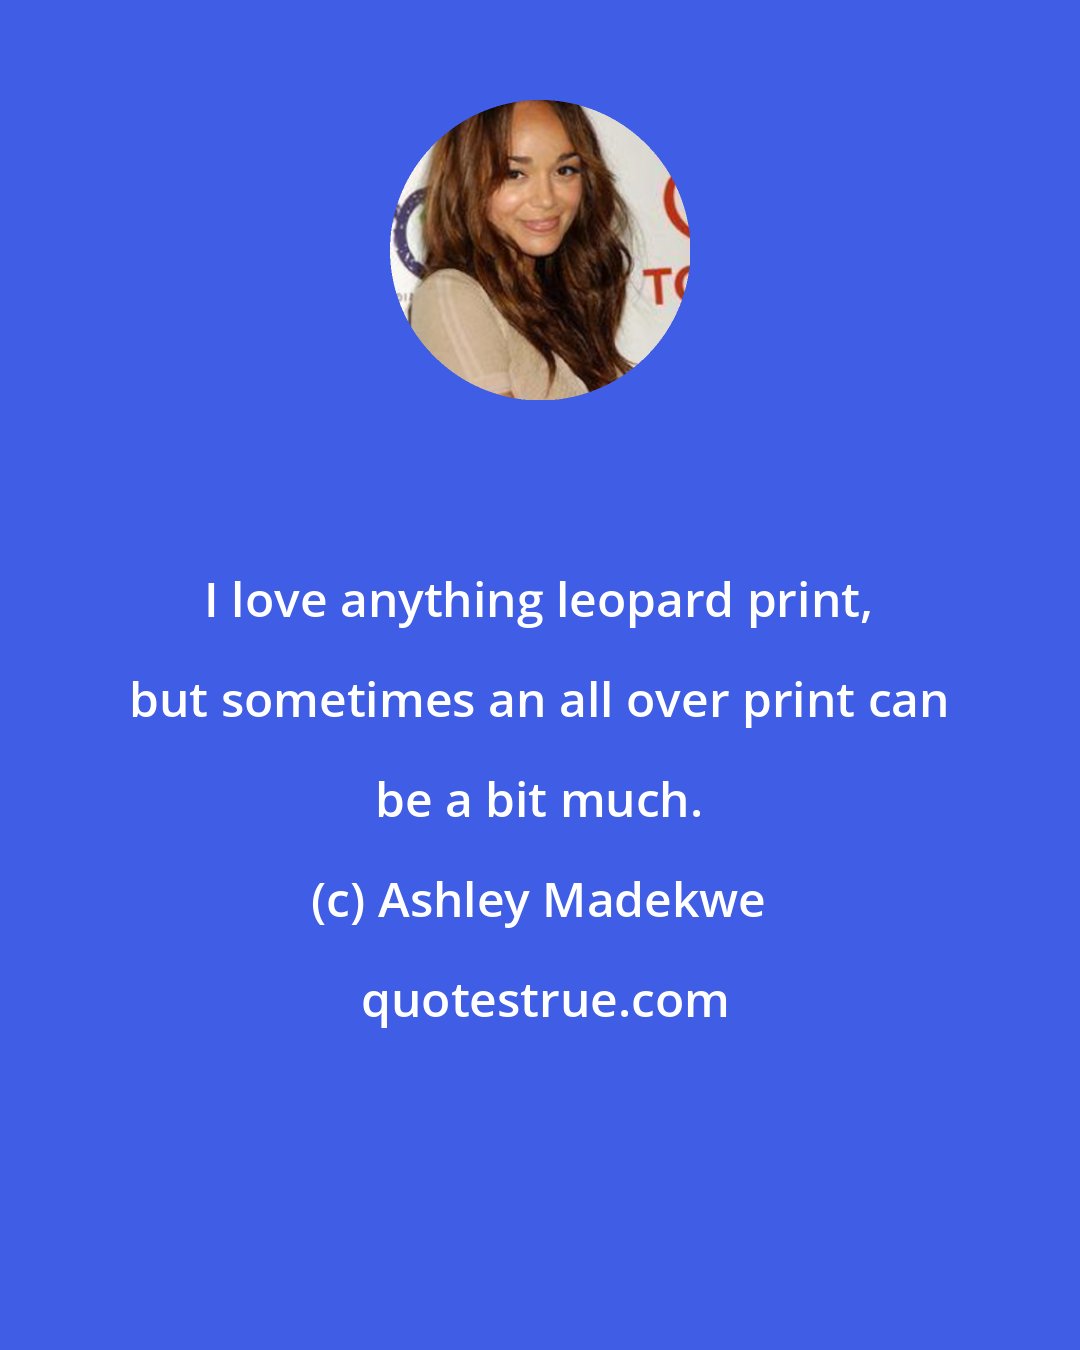 Ashley Madekwe: I love anything leopard print, but sometimes an all over print can be a bit much.